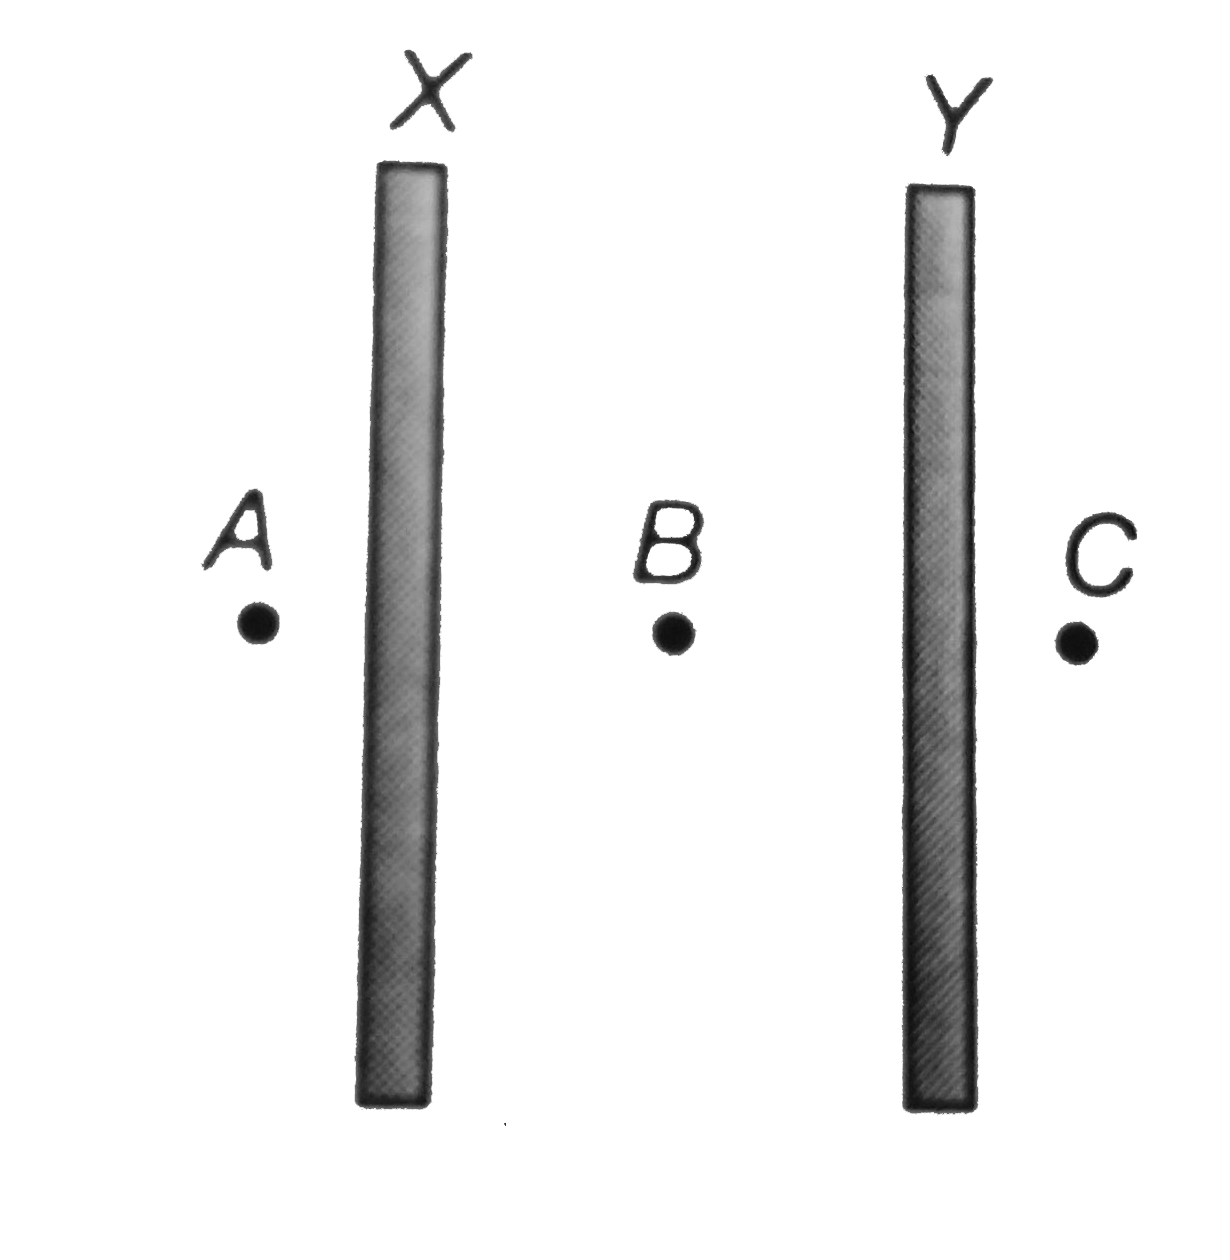 X and Y are large, parallel conducting plates close to each other. Each face has an area A. X is given a charge Q. Y is without any charge. Points A,B and C are as shown in the figure.